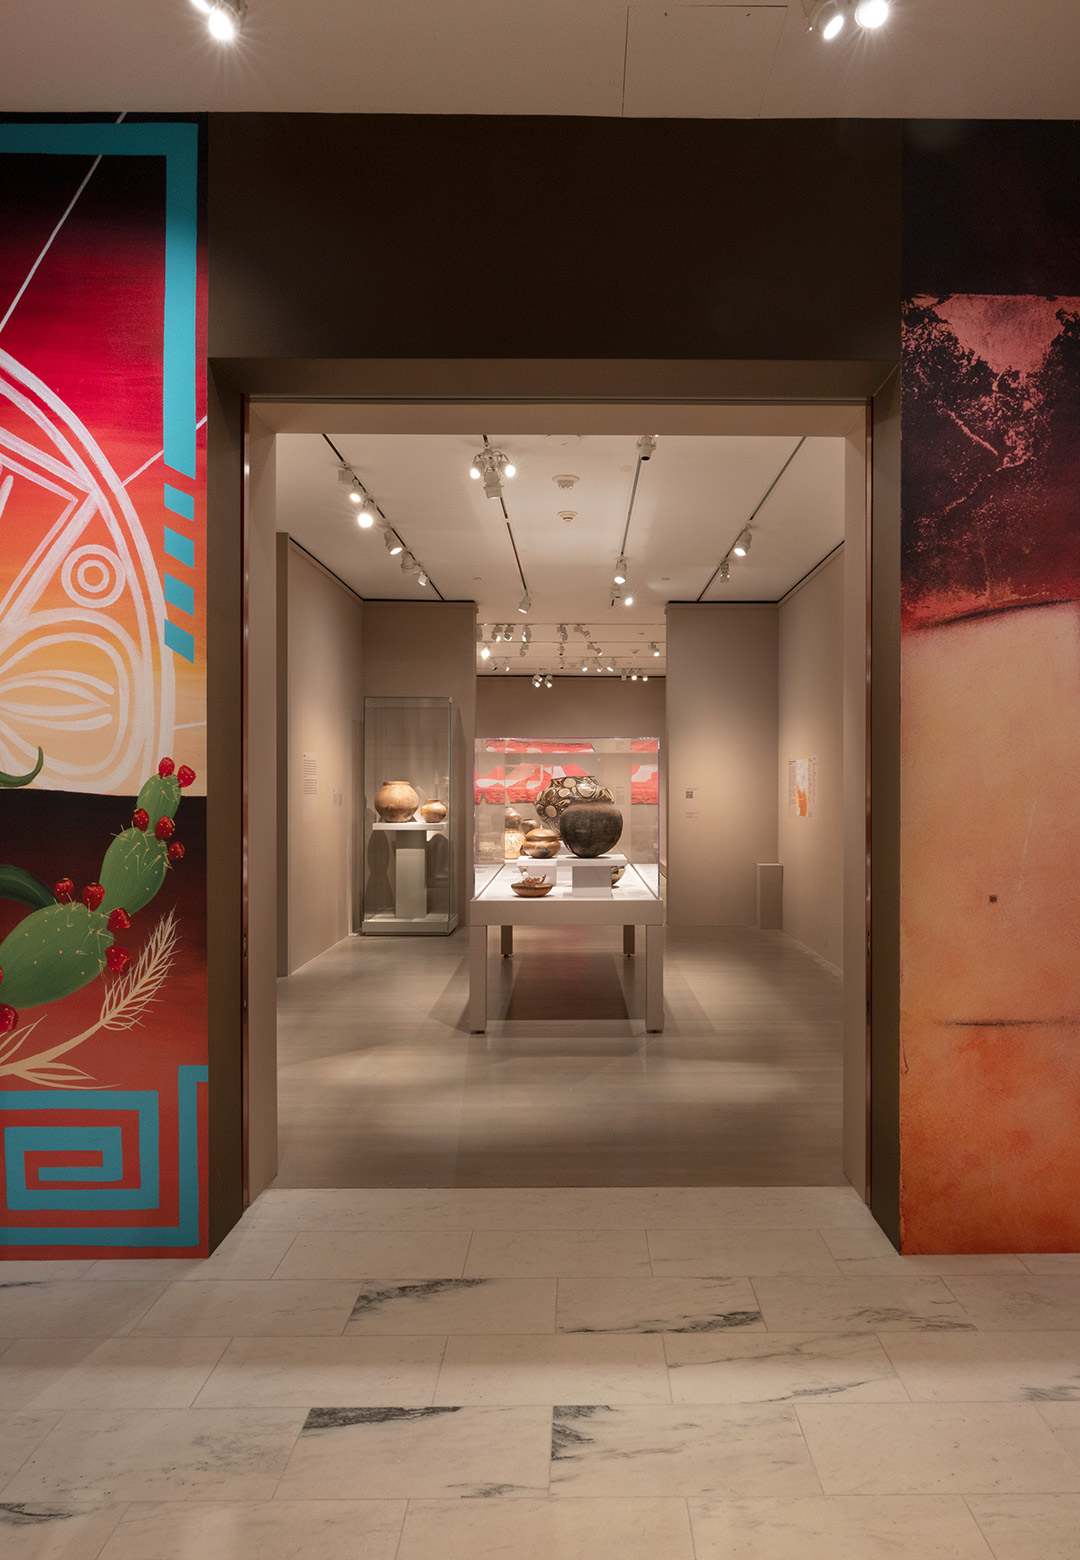 The MET's latest exhibition gives voice to tribal communities and sovereign nations